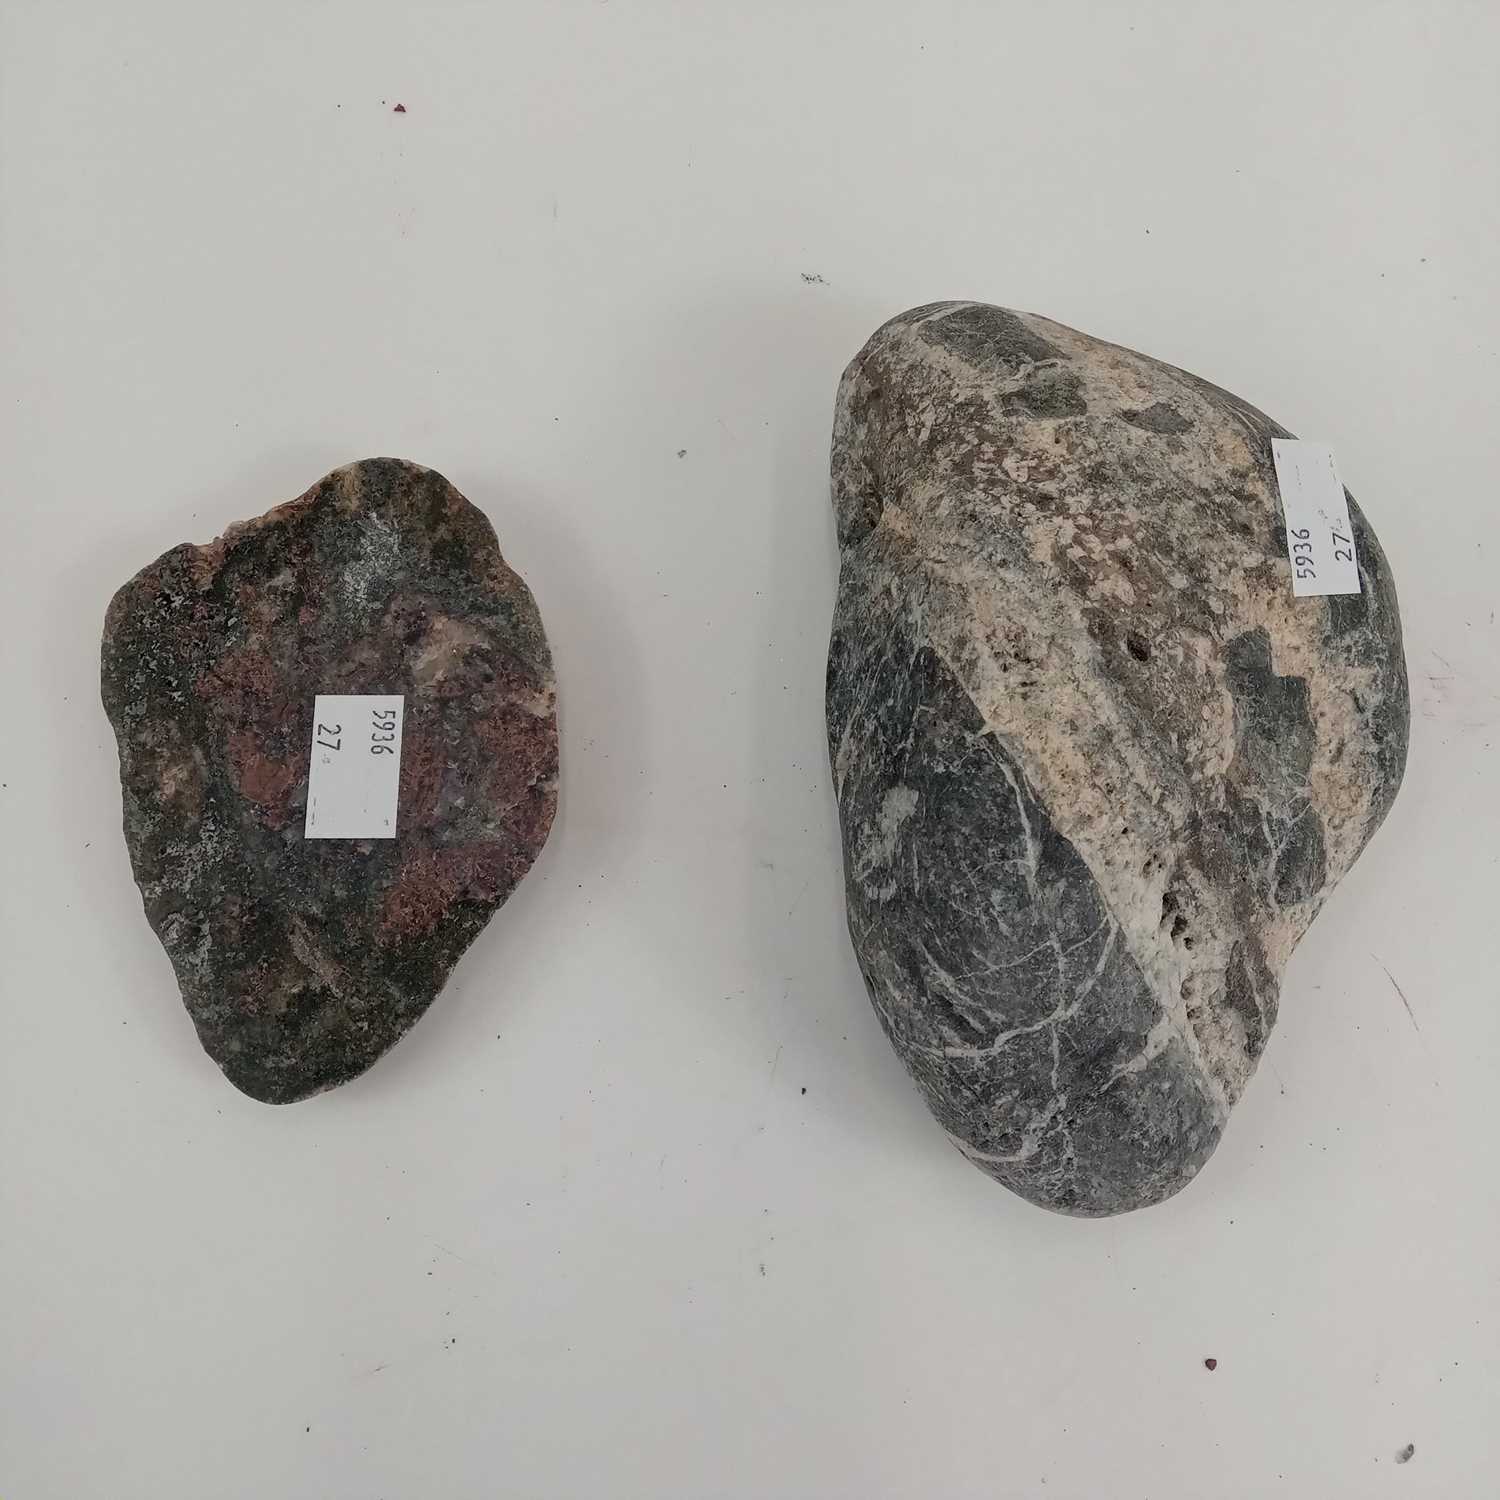 Alluvial tin pebble and cut ‘wood tin’ specimens from Carbis Bay Cornwall. - Image 5 of 5